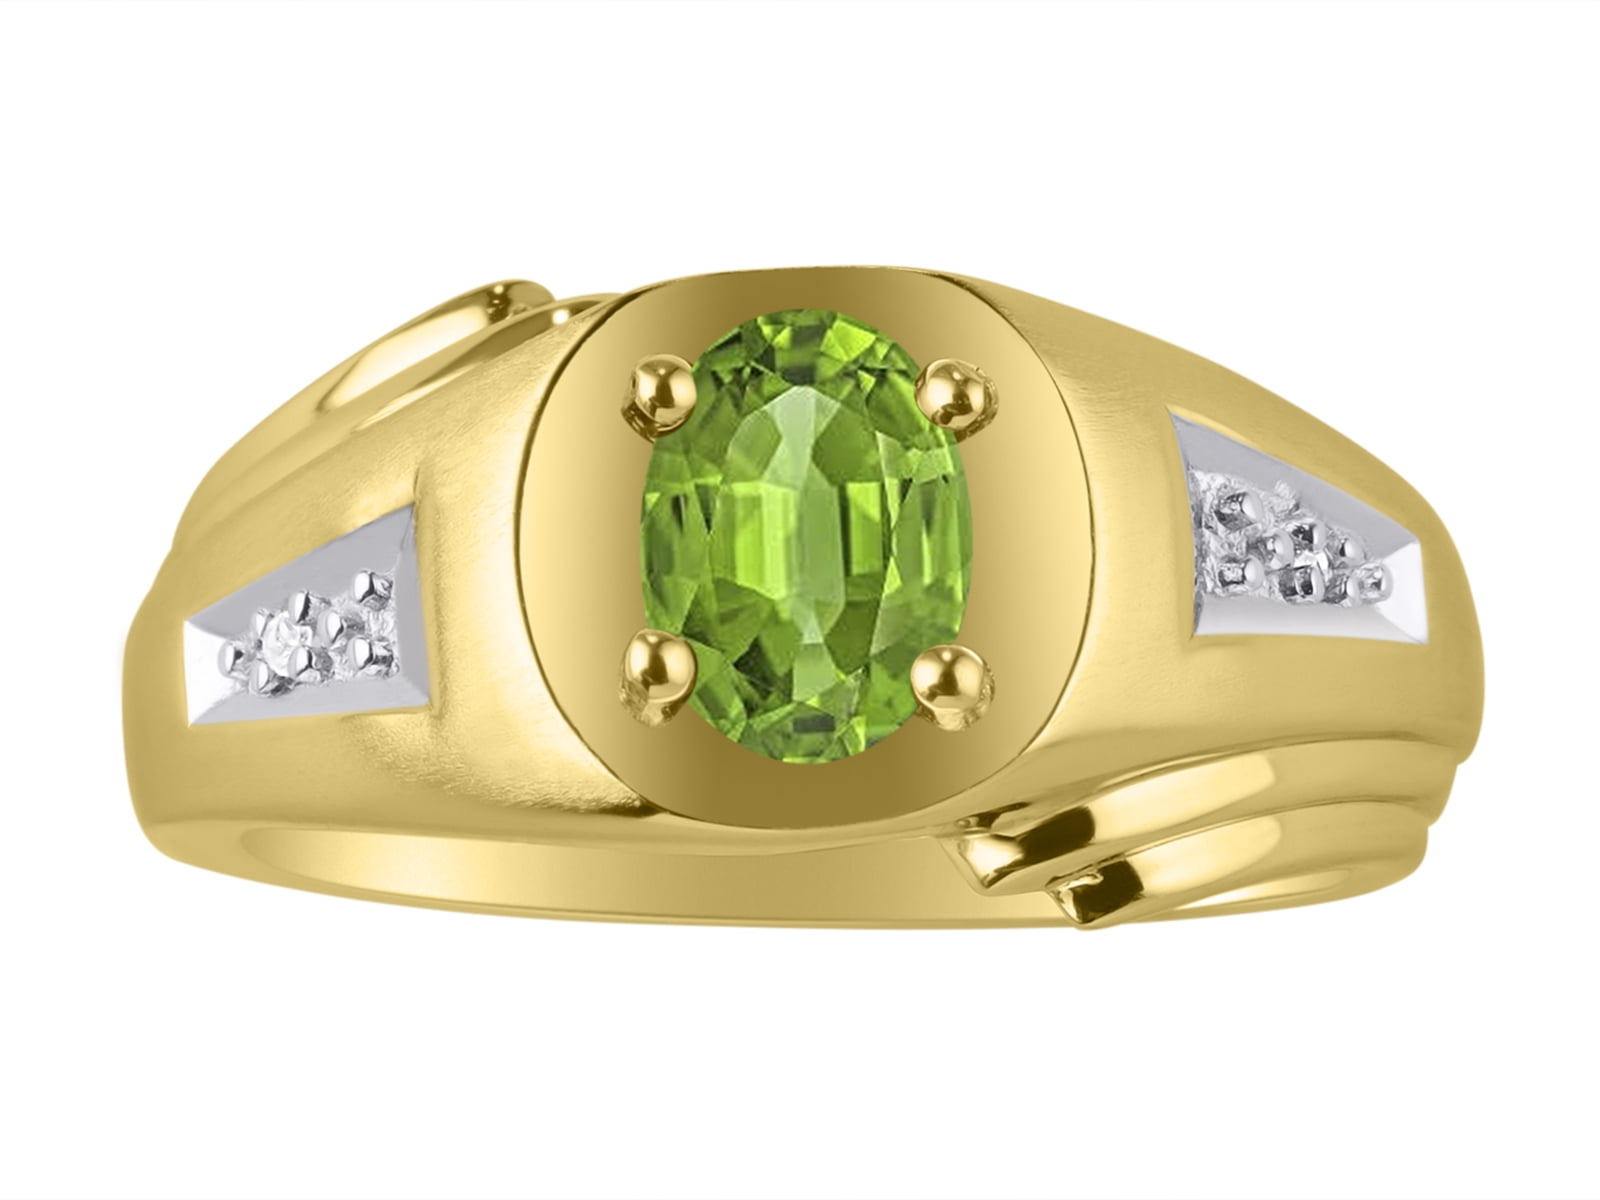 Natural Untreated Peridot ring from the Gemstoneuniverse collection of Fine  Gemstones | Peridot gemstone, Peridot stone, Peridot